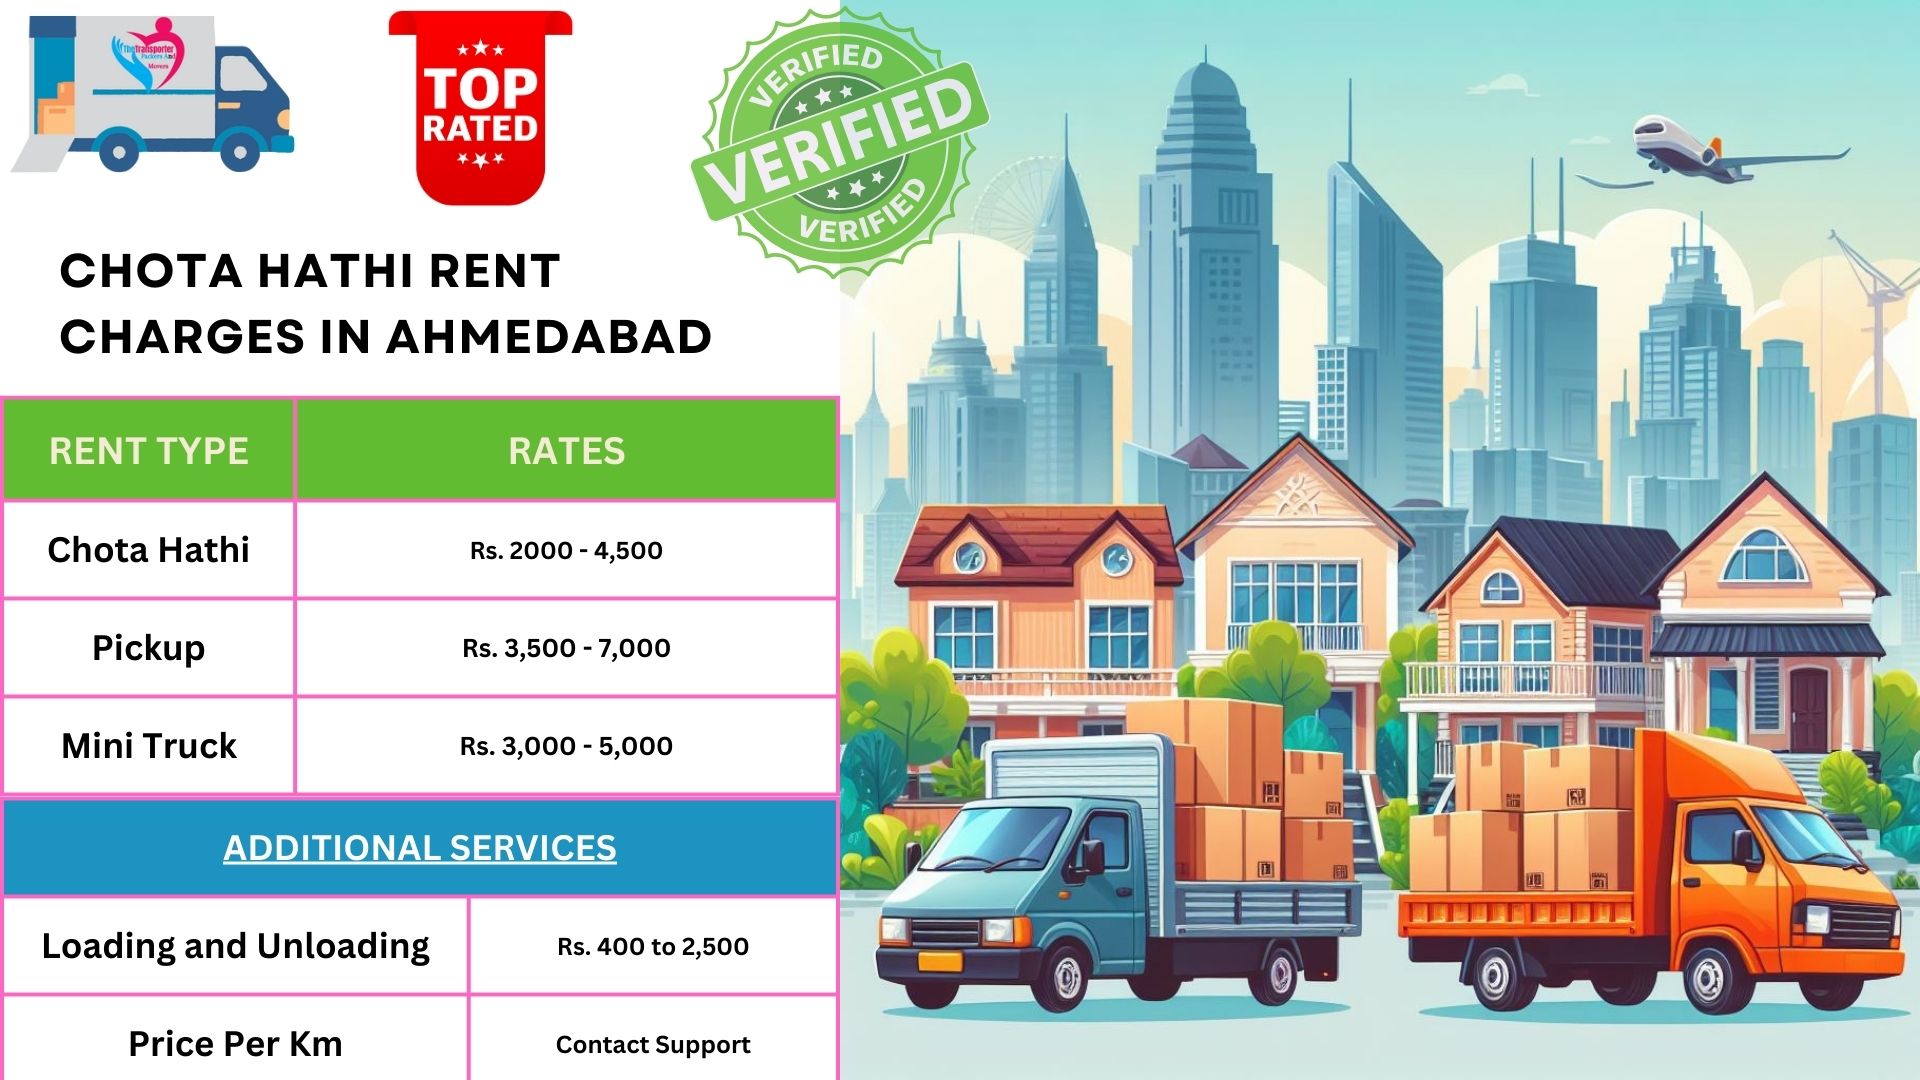 Getting the Best Chota Hathi on Rent in Ahmedabad